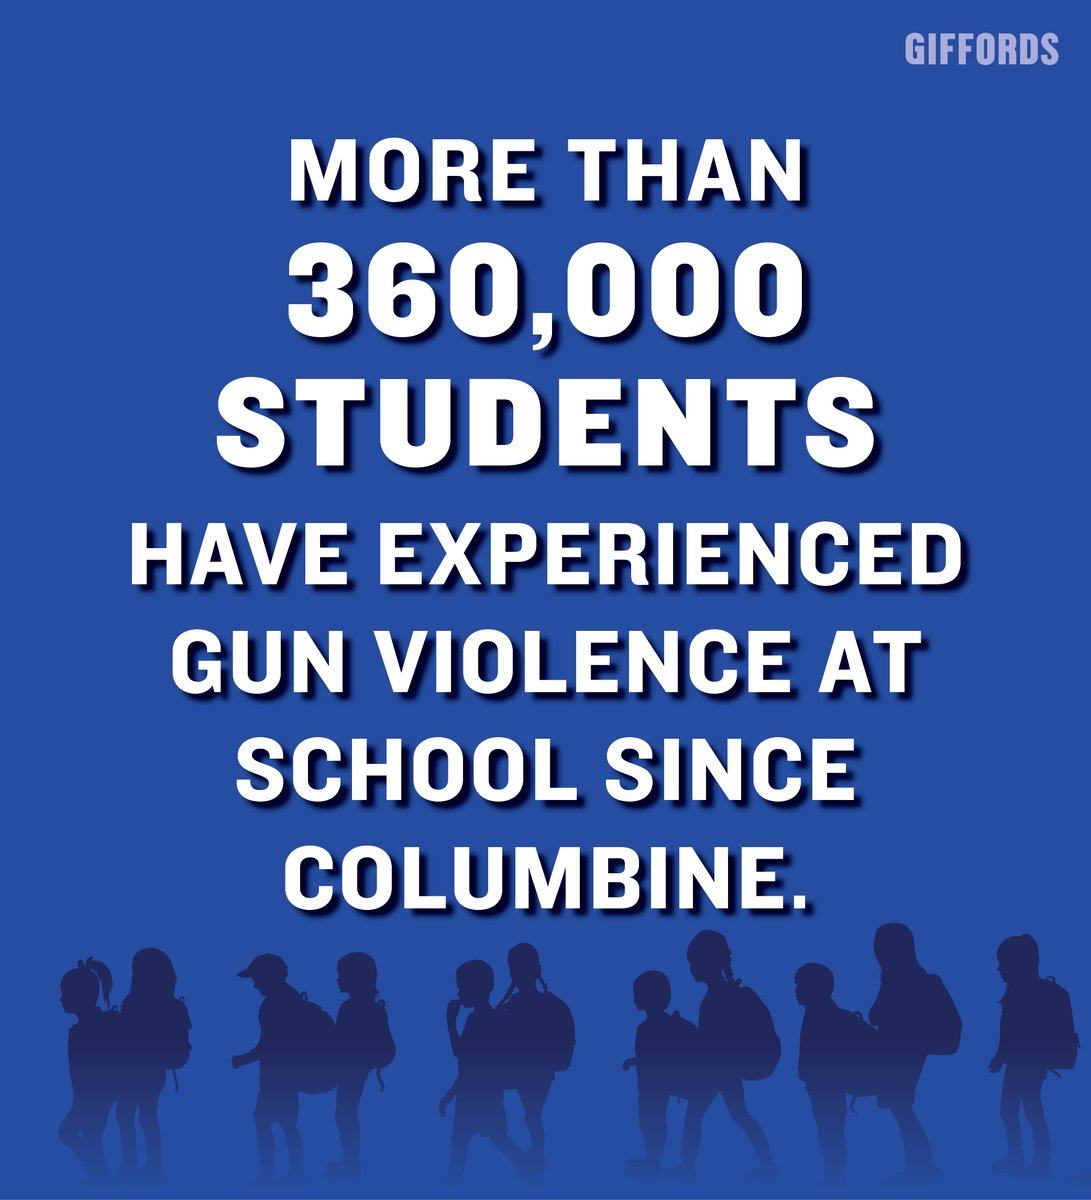 We are failing our children. In the 25 years since the shooting at Columbine High School, hundreds of thousands of students have experienced gun violence at school. Schools should be places of learning—not of carnage.